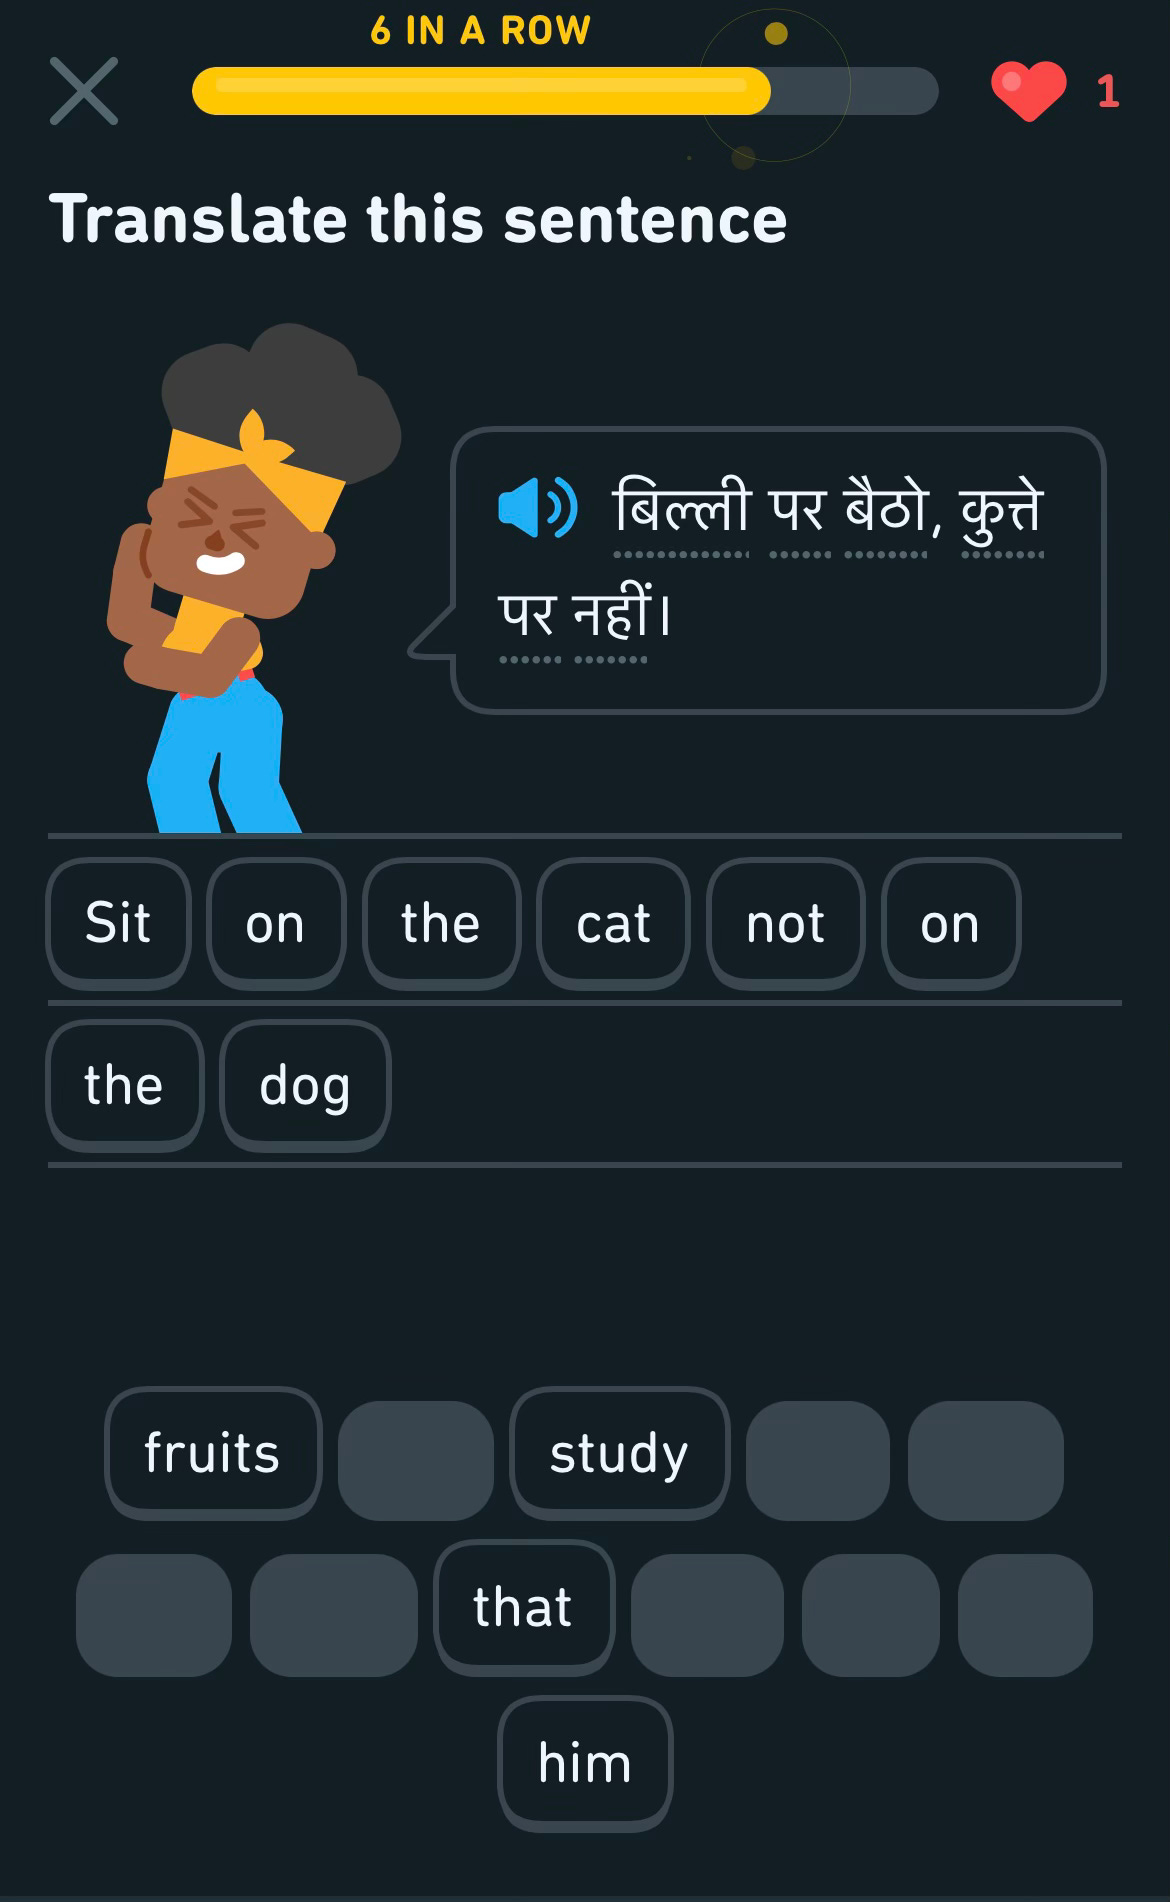 On the left side of this Duolingo screenshot, a cartoon black woman with a yellow top and bandana dances. She wears blue jeans. The sentence "Sit on the cat not on the dog" is written in Hindi and English.